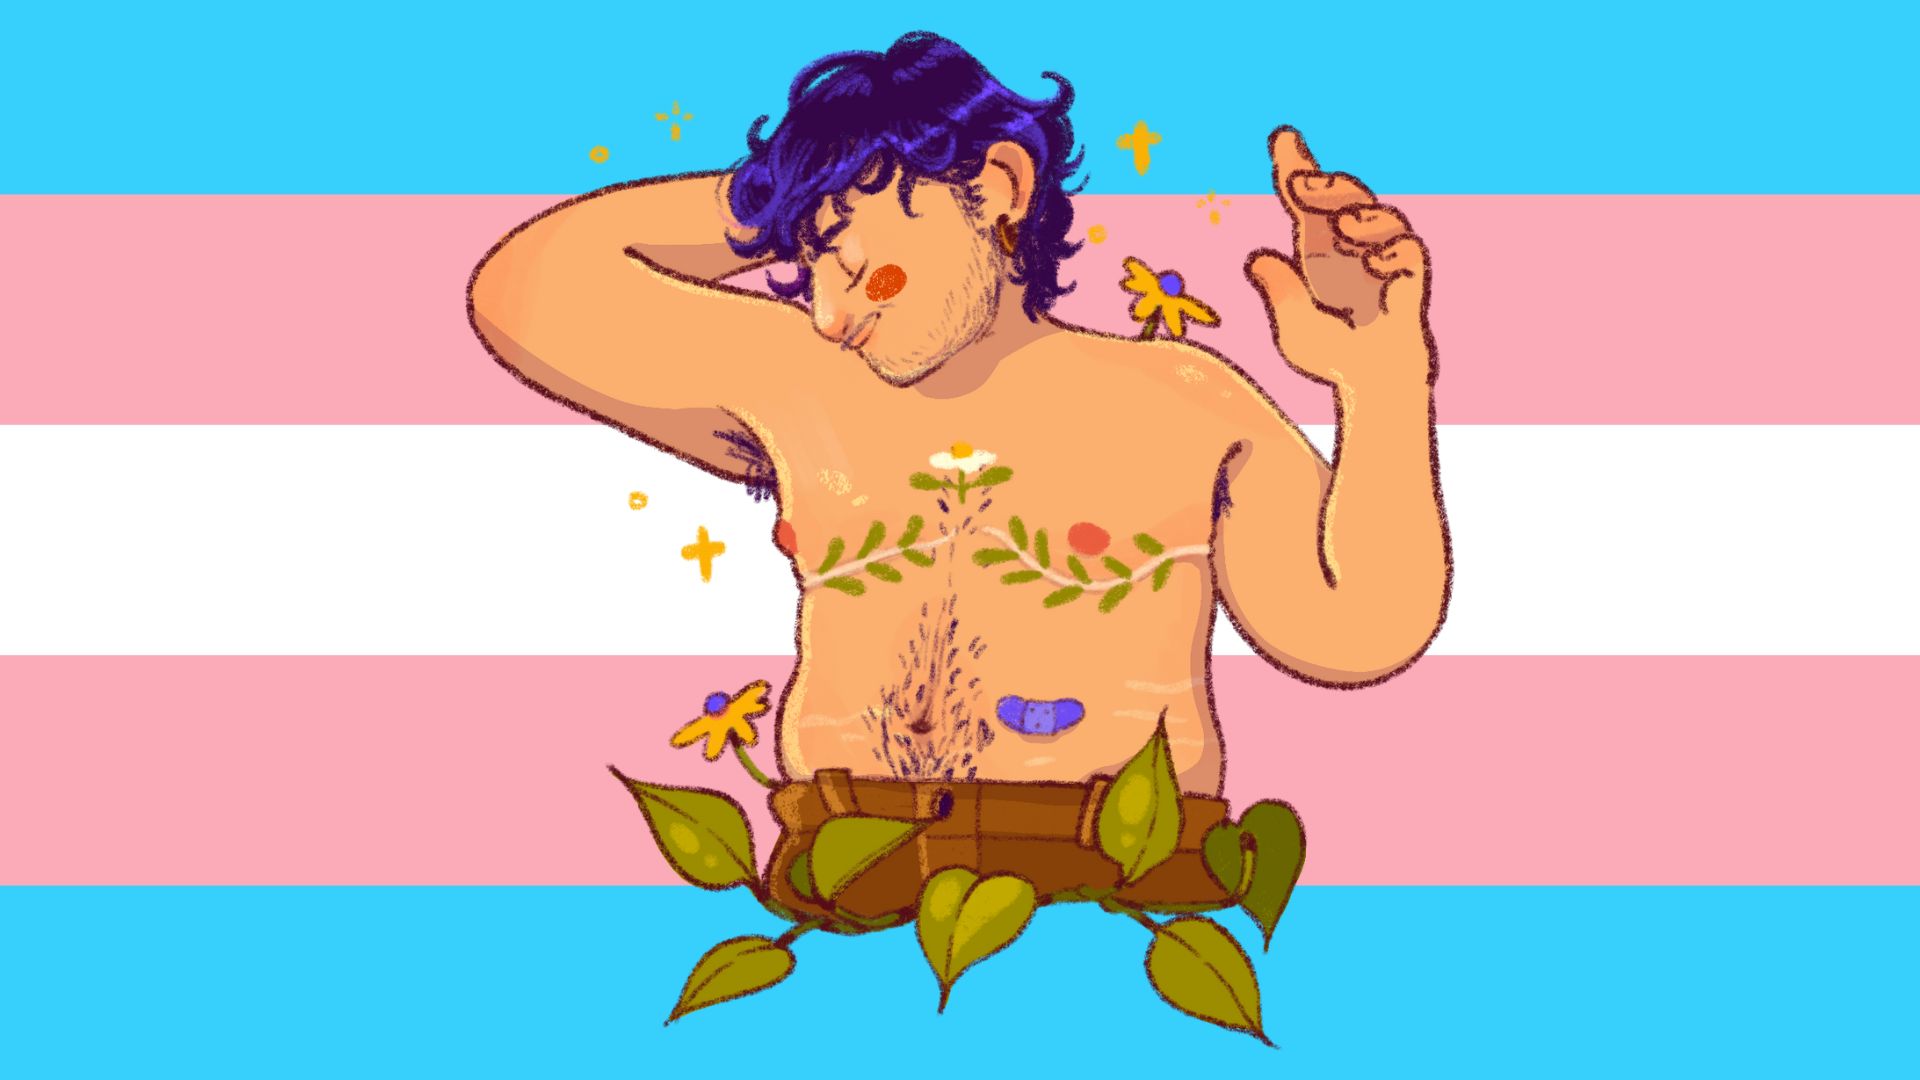 An image composed of a transgender flag background with a drawing of a pleased looking shirtless transmasculine person surrounded by leaves with visible top surgery scars.